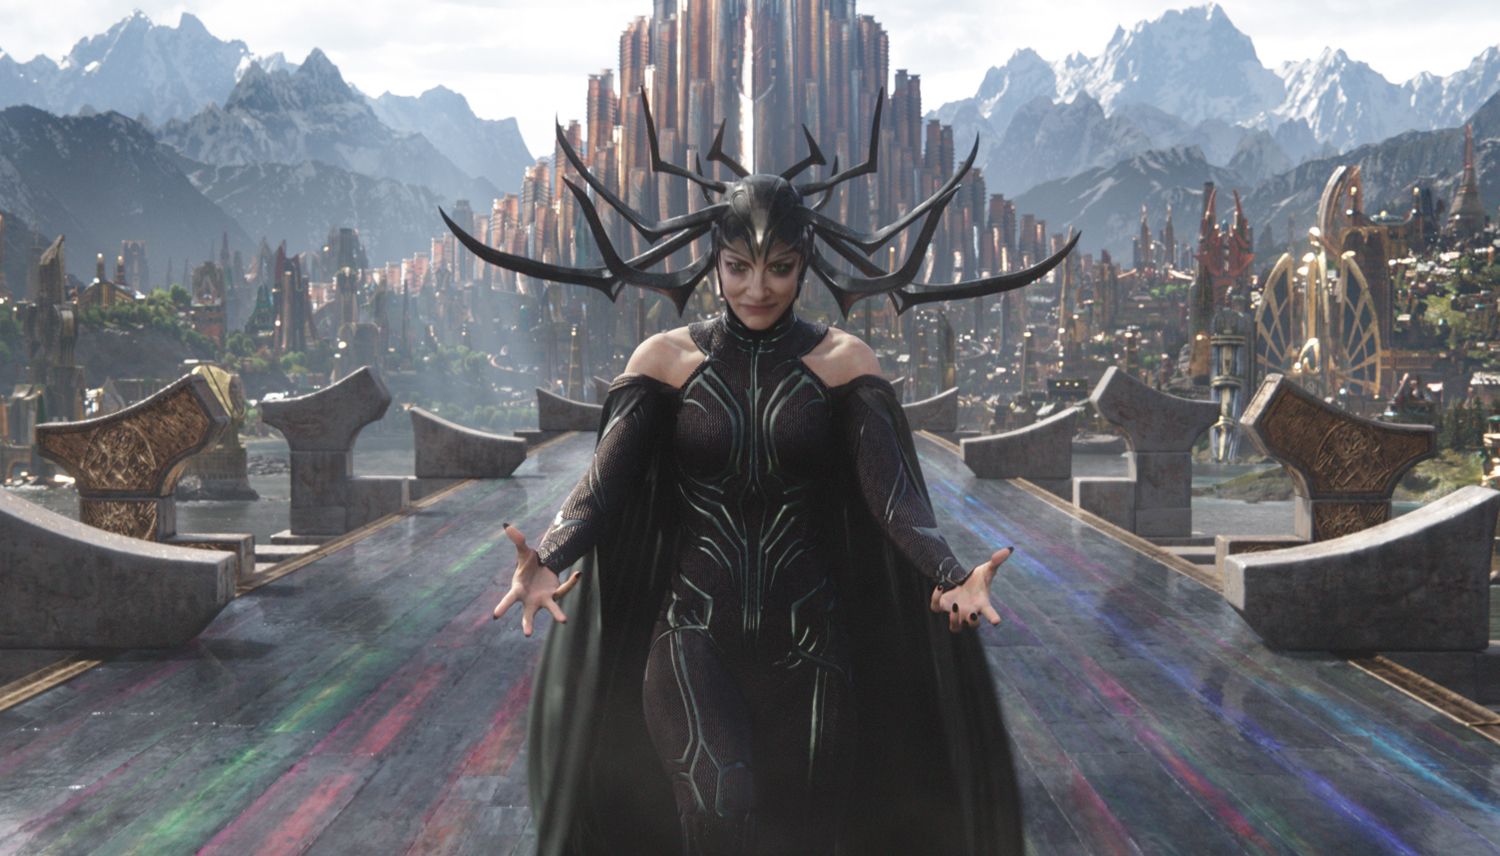 Thor Ragnarok 7 Characters It Ruined (And 8 It Greatly Improved)